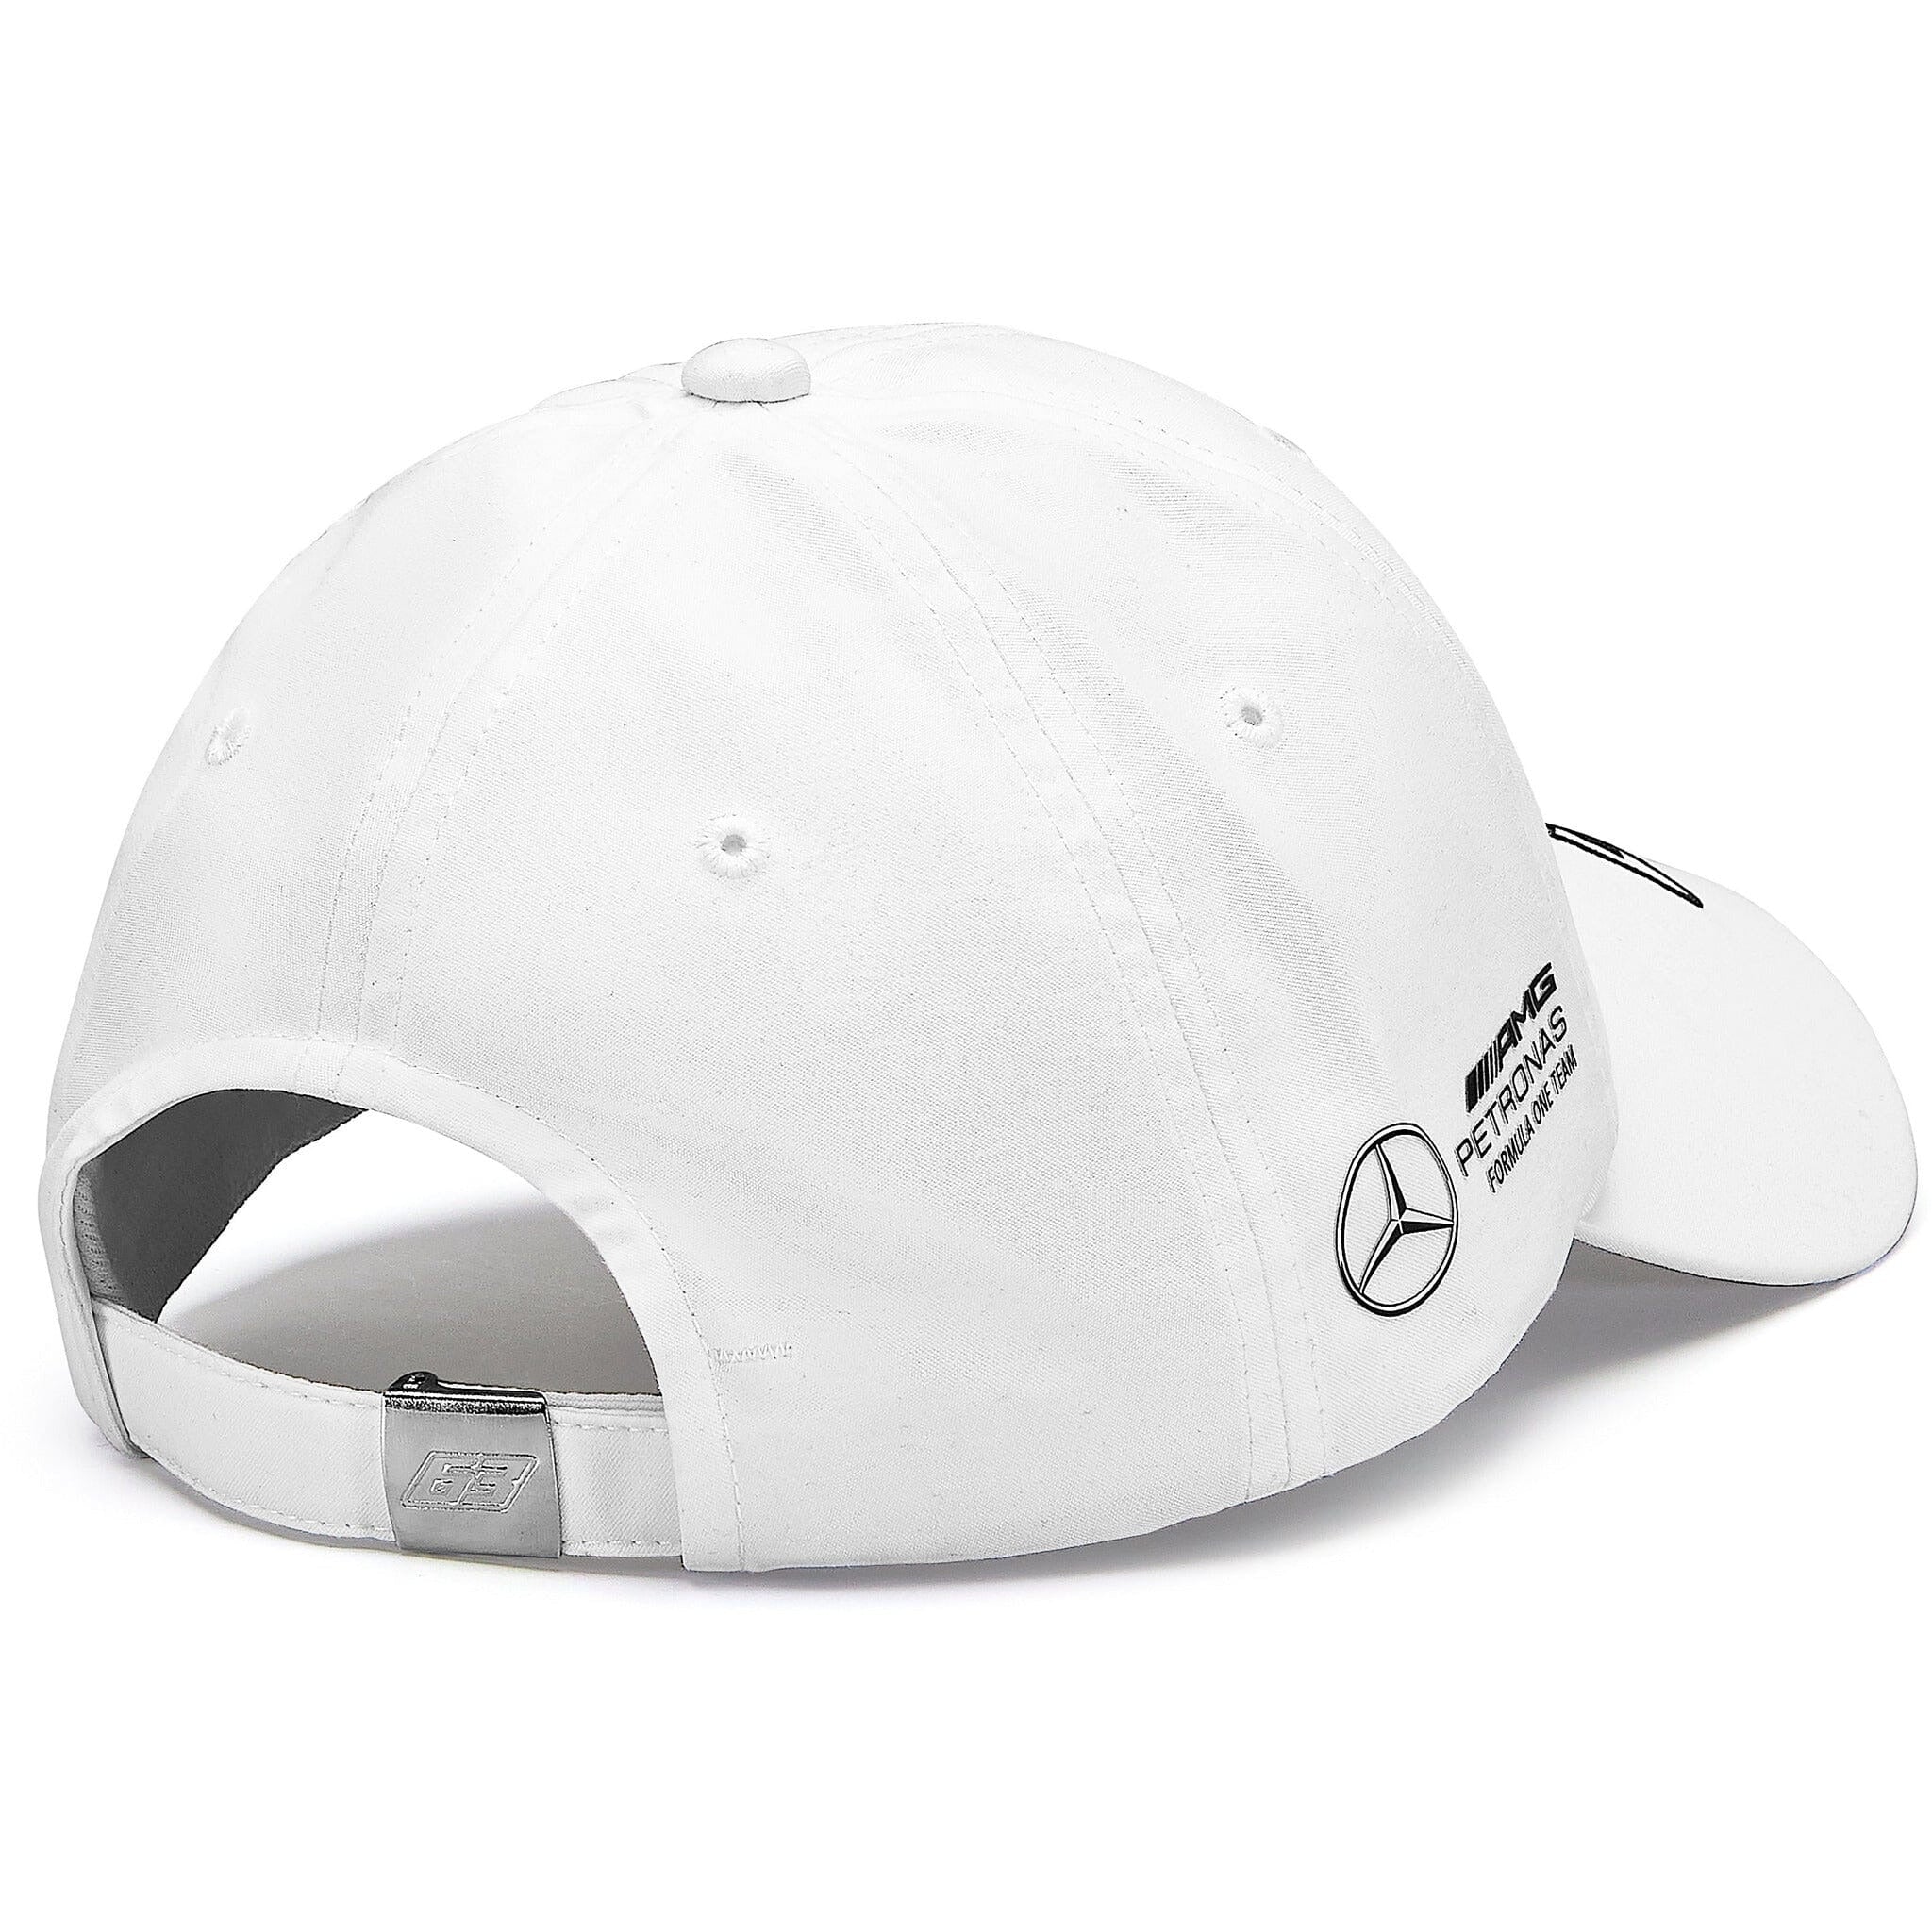 Mercedes AMG Petronas F1 George Russell Adult Baseball Hat White